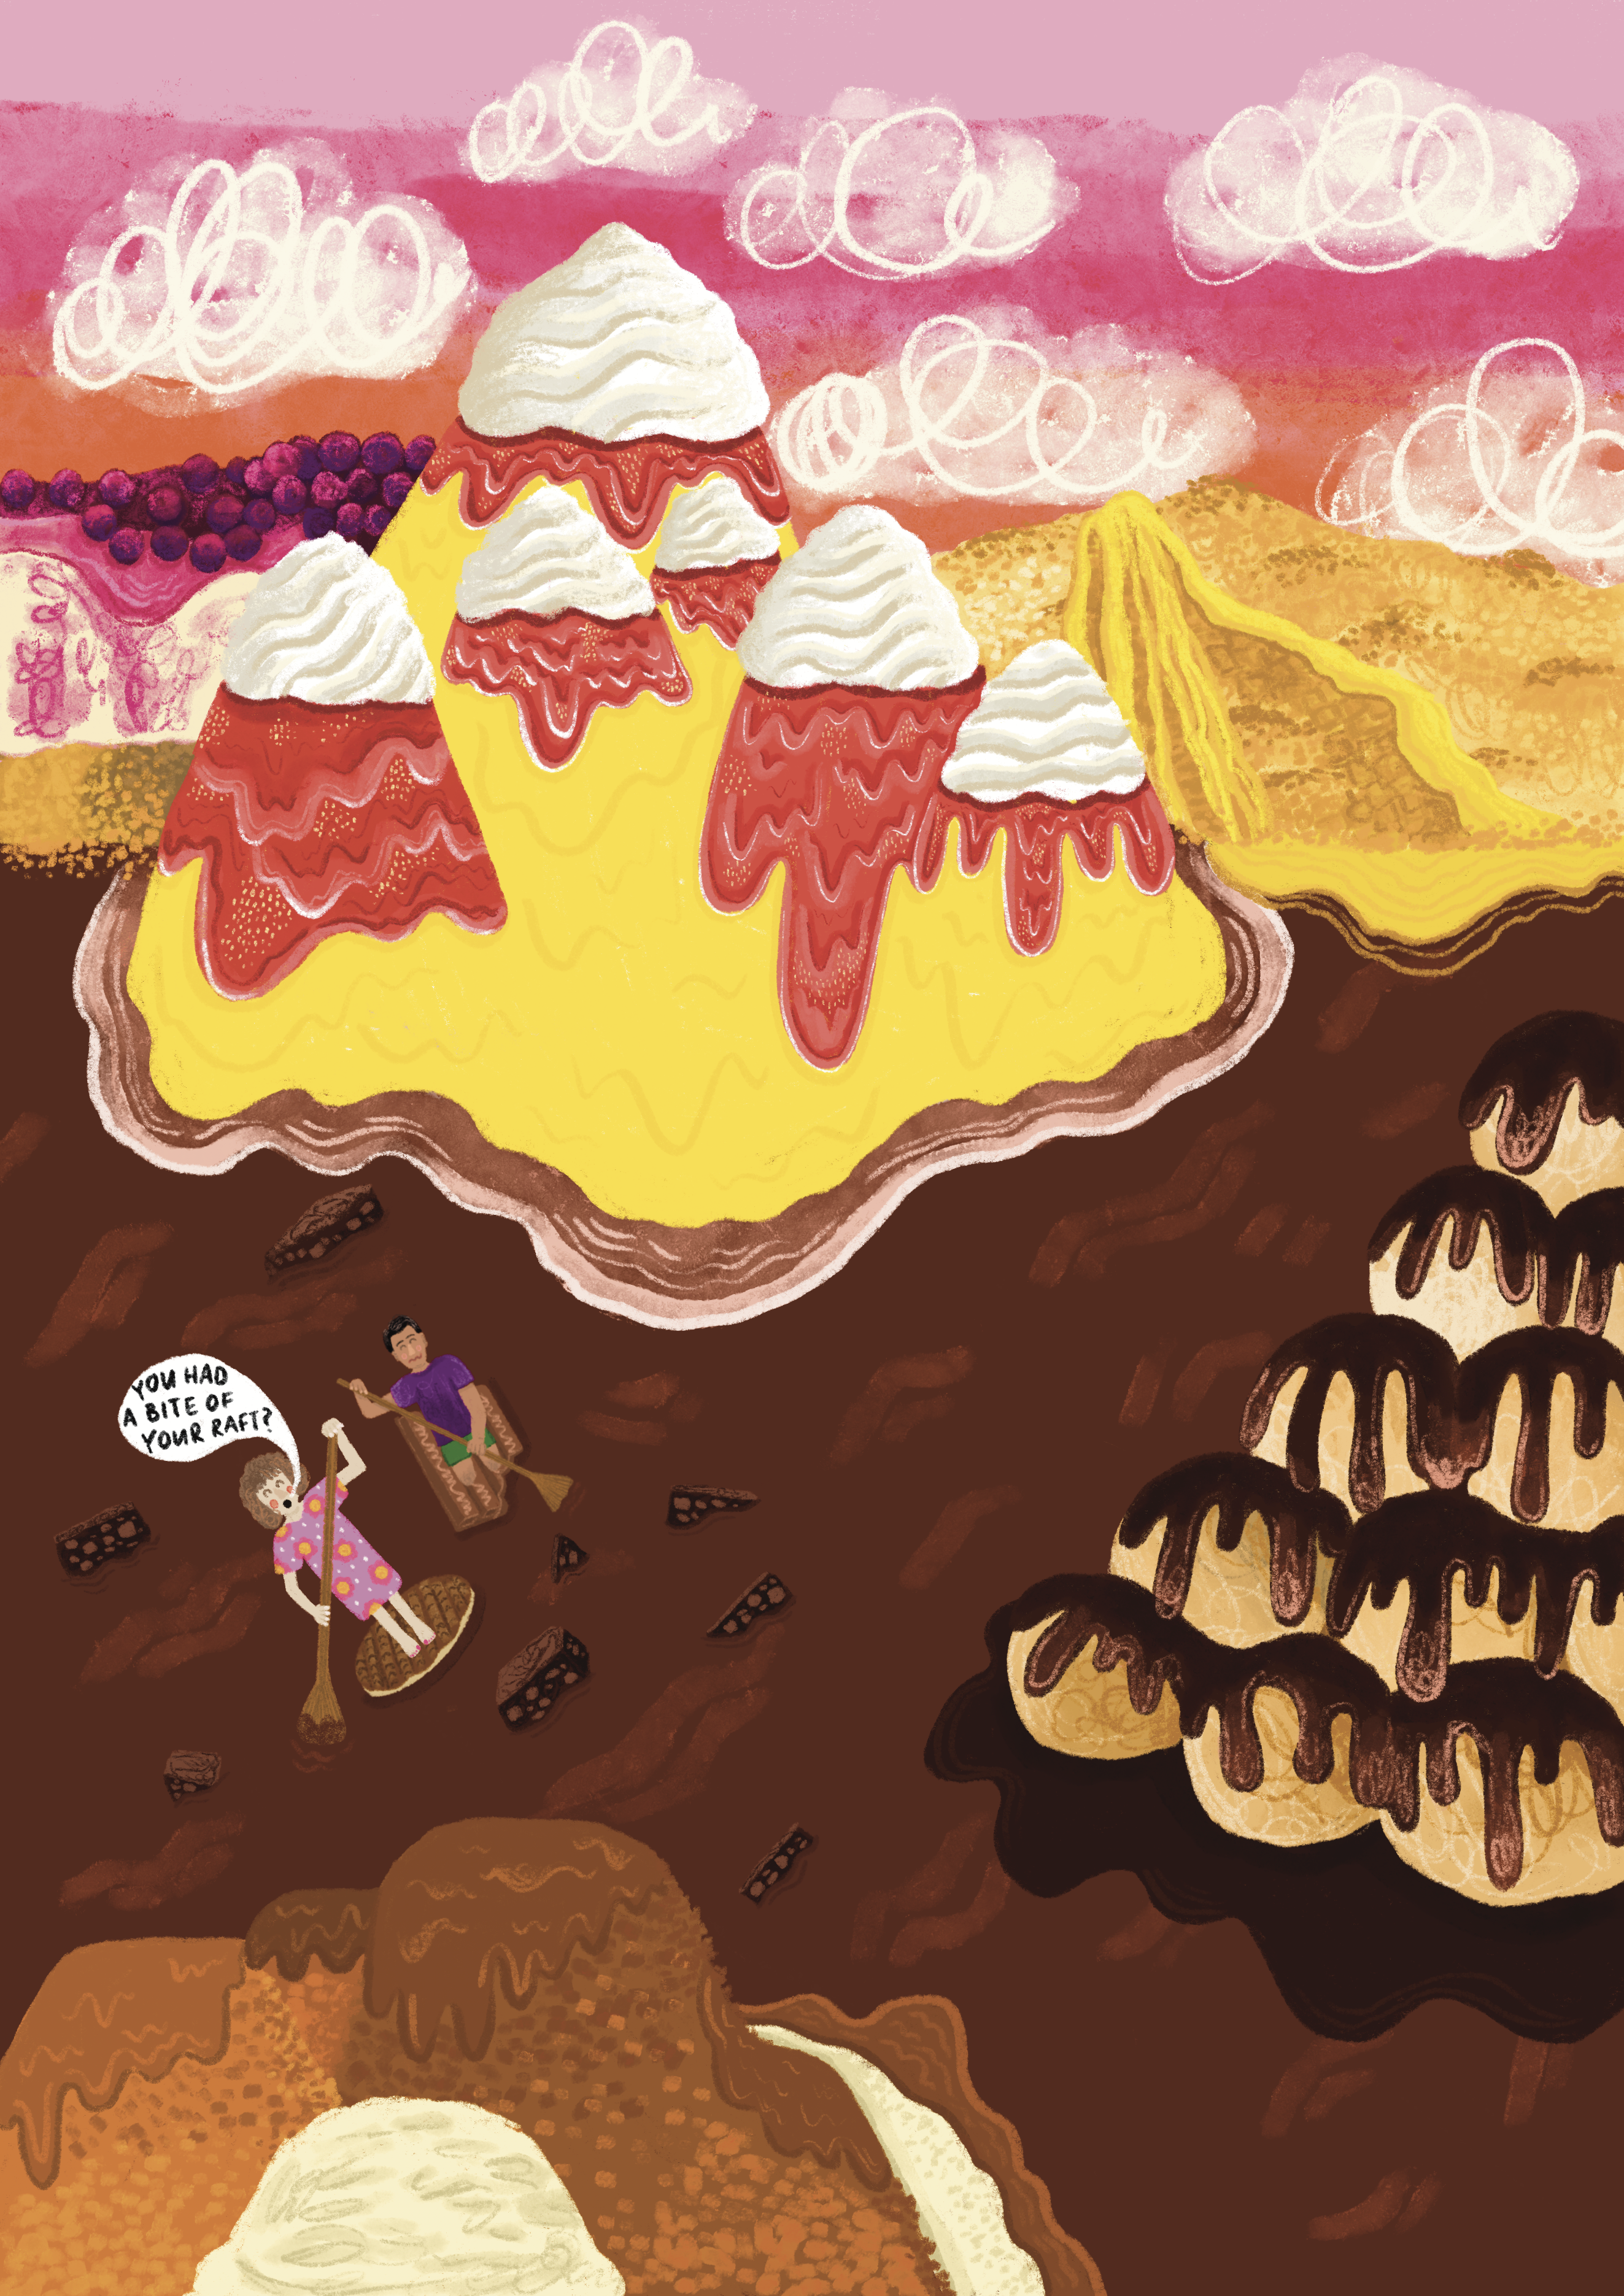 An illustration done by Hope Bullen with a concoction of different dessert based mountains. Including a trifle, sticky toffee pudding, profiteroles, berry cheesecake, and an apple crumble. teh river that surrounds them is made of chocolate and has chunks of brownie in it. There is a man and woman paddle boarding on a chocolate digestive and a kitkat. The lady is wearing a pink flowery dress and is saying "you had a bite of your raft" as there is a bite sized chunk bitten out of the kitkat the man is standing on.